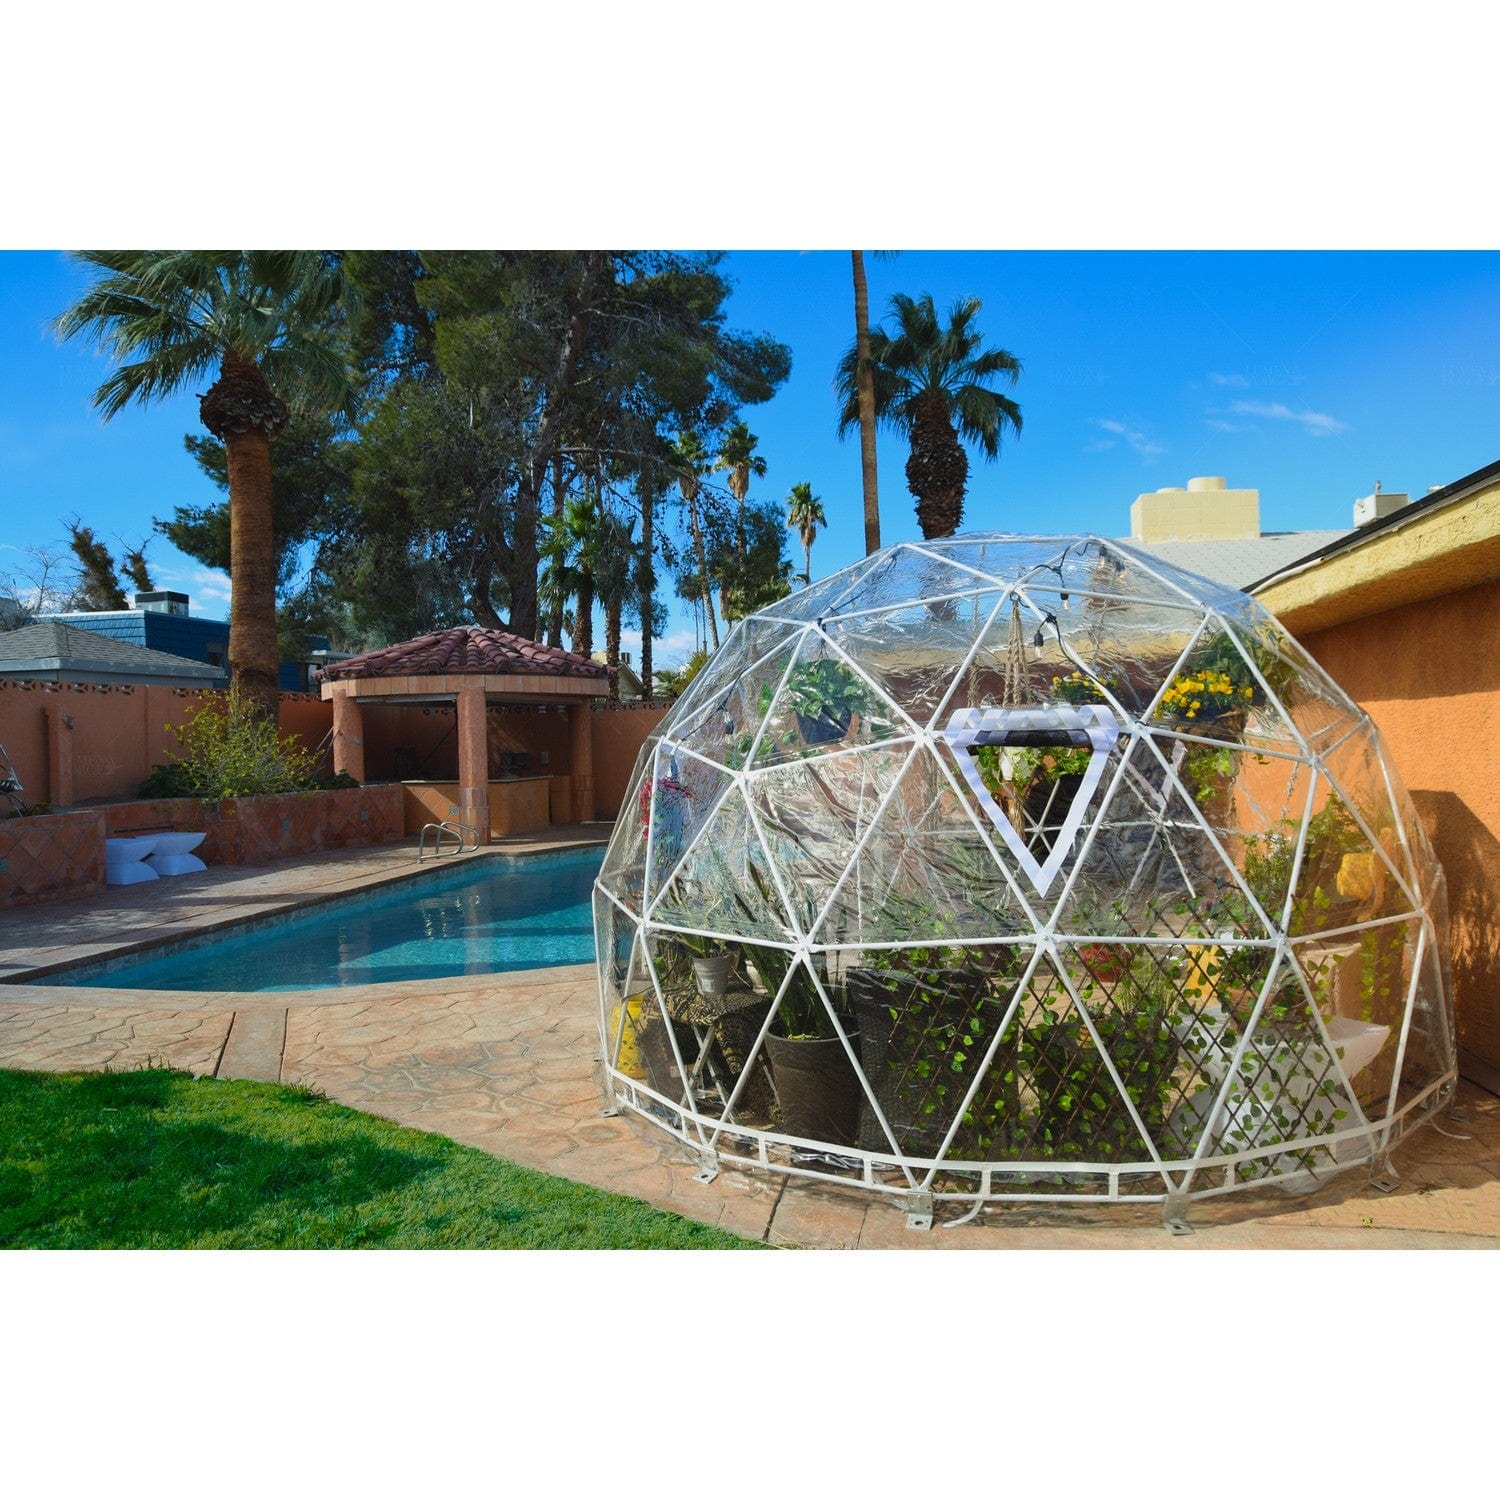 Lumen & Forge Sun Room Kit Lumen & Forge | Geodesic Dome Greenhouse, Sunroom, Dining - 13 ft 4m-Dome